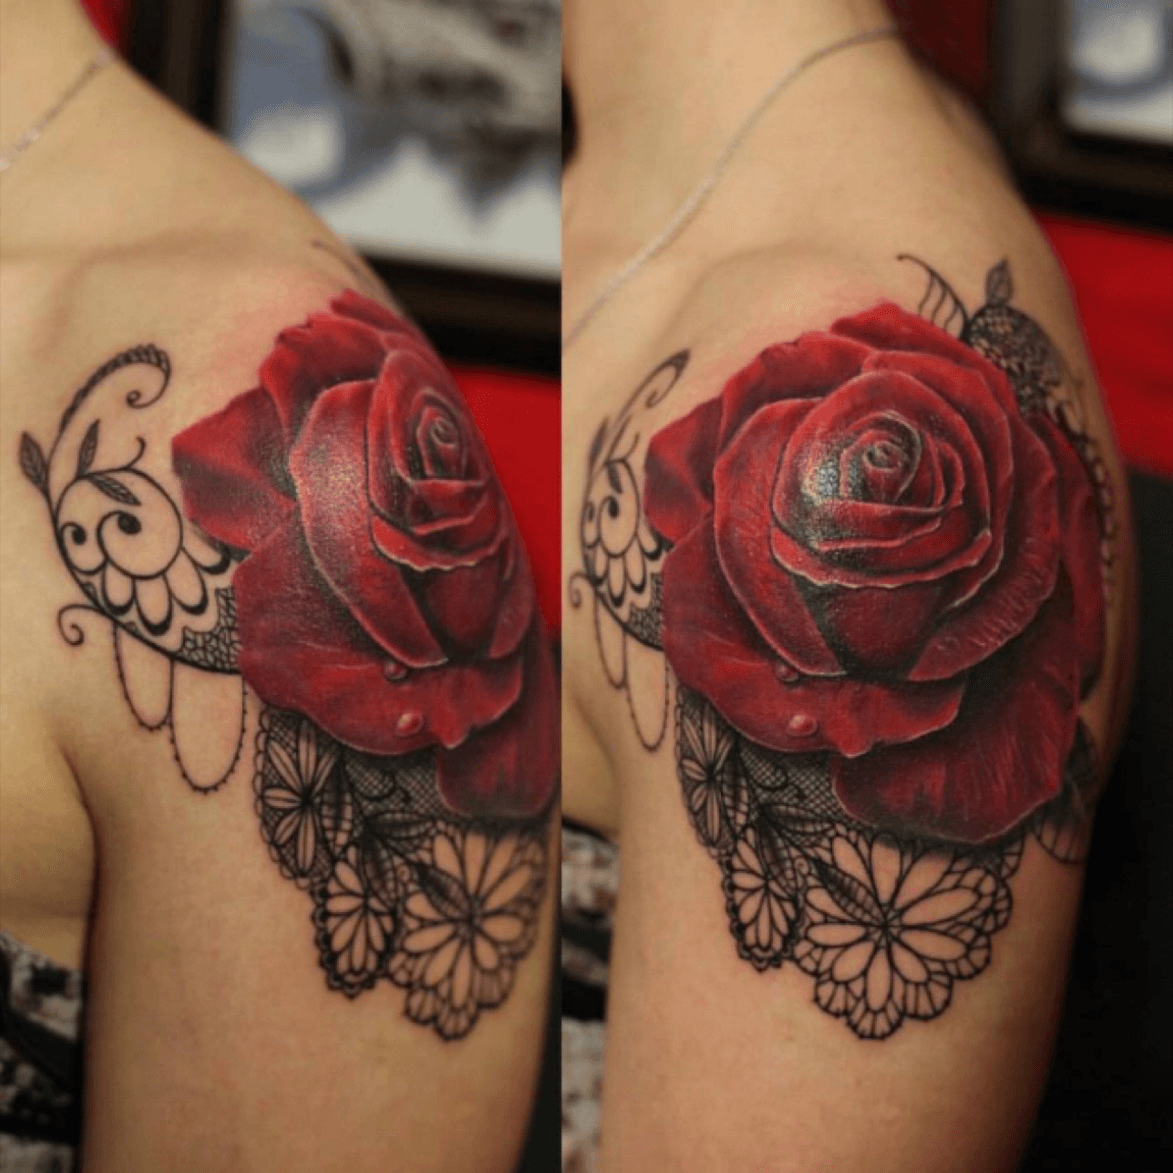 10 Shoulder Rose Tattoo Ideas That Will Blow Your Mind  alexie